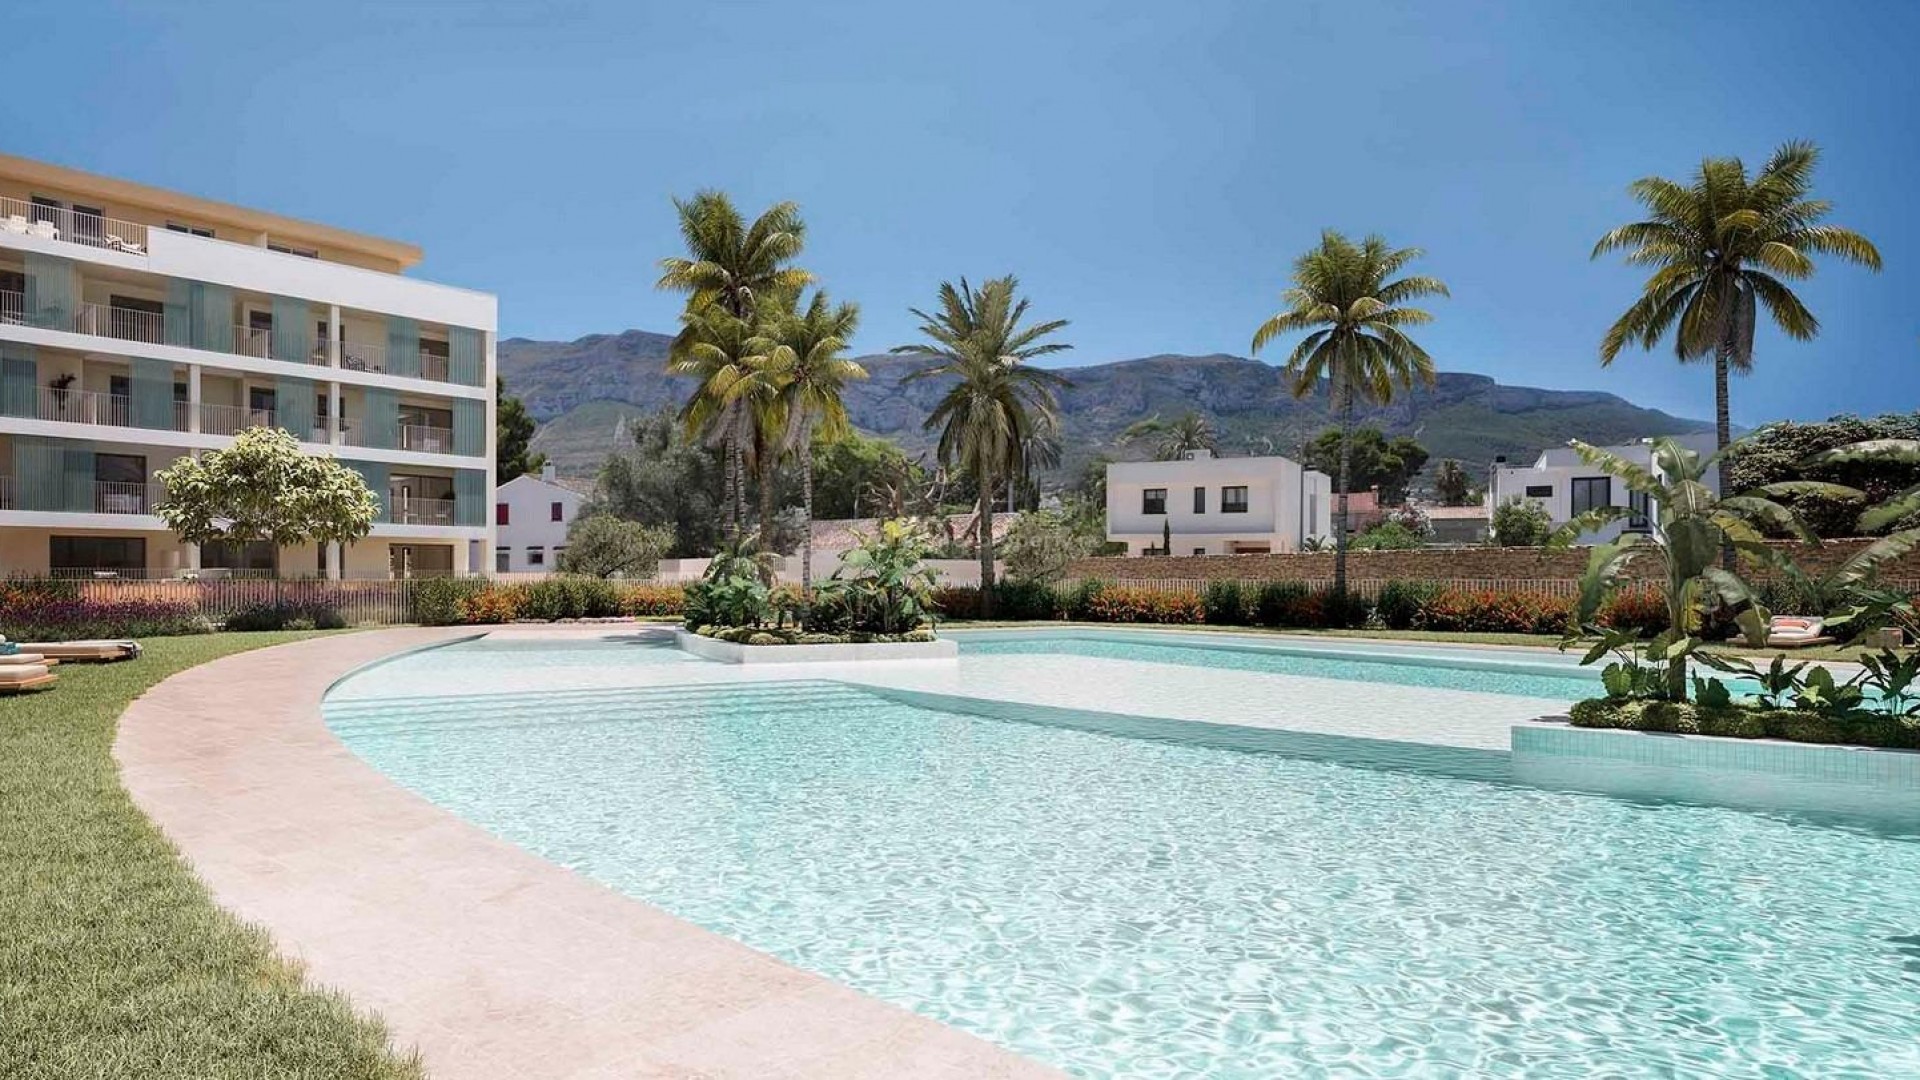 Luxury flats/apartments in Denia with fantastic garden and pool area, 3/4 bedrooms. Just a few meters from the beach. Terrace and gym